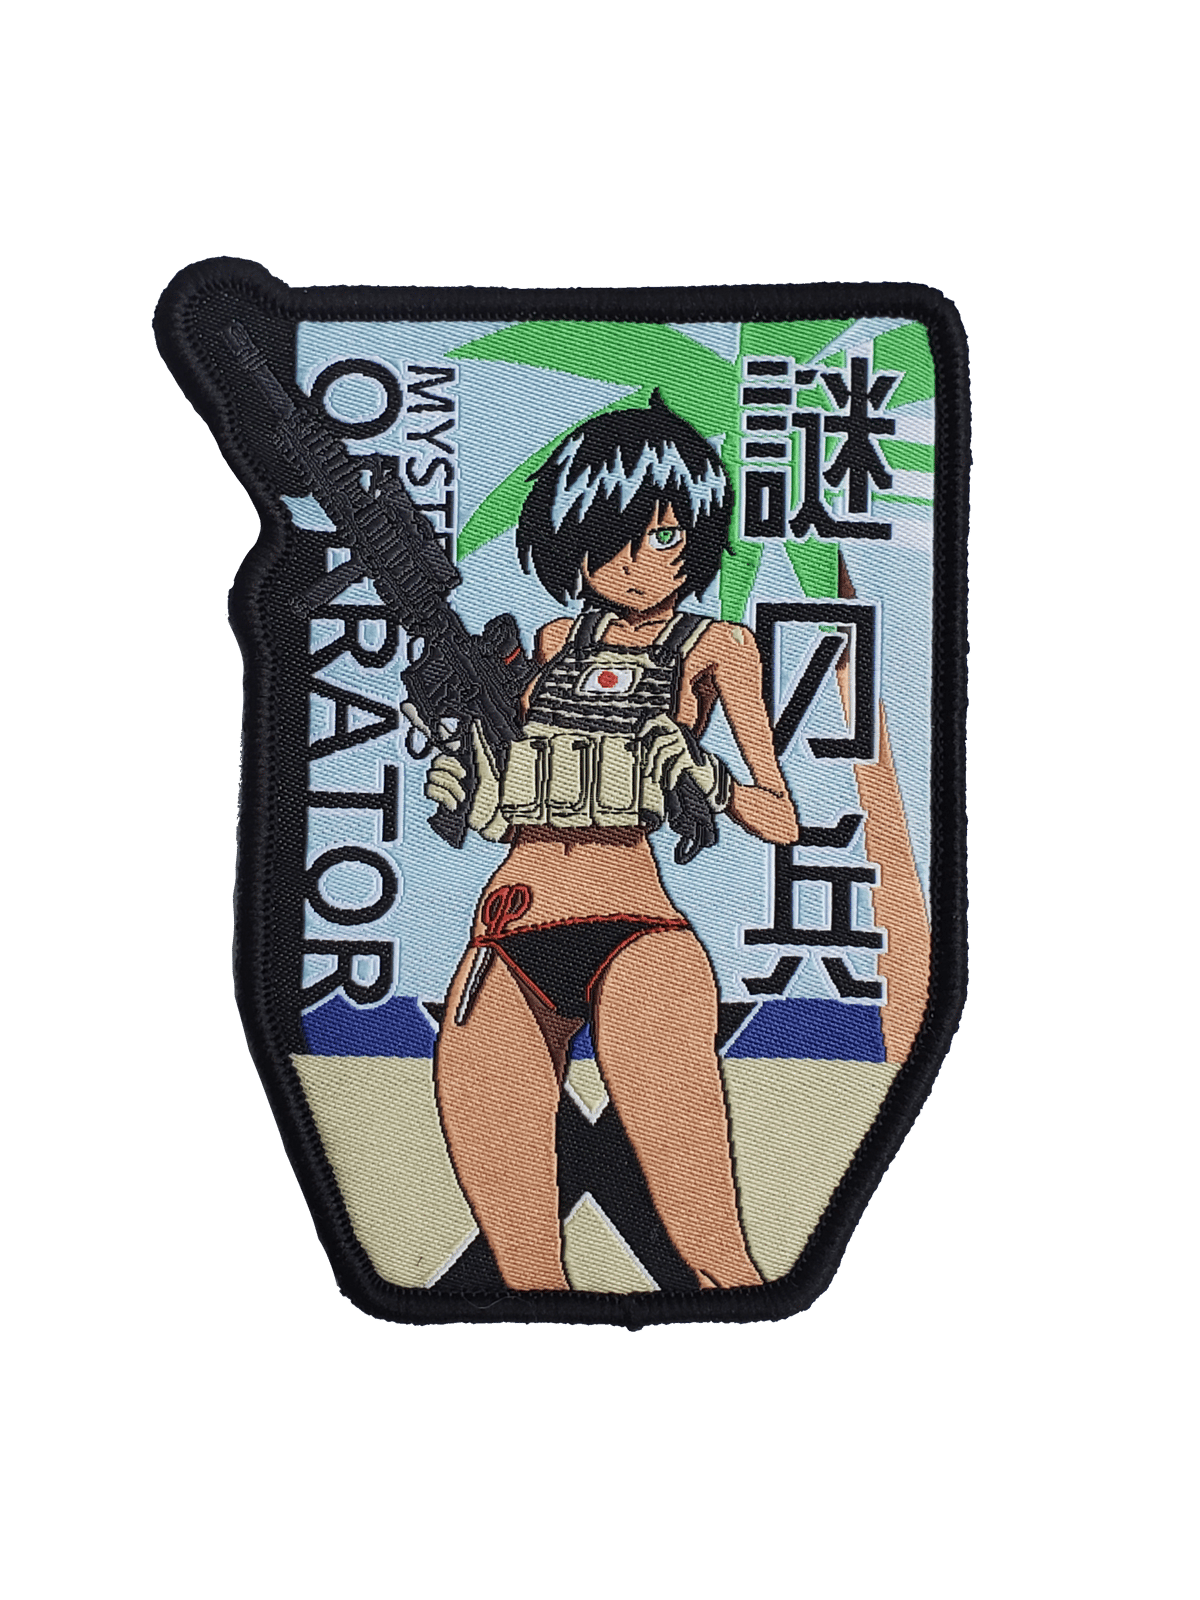 Girls Frontline 'FNC Choco' Airsoft Morale Anime Patch | eBay